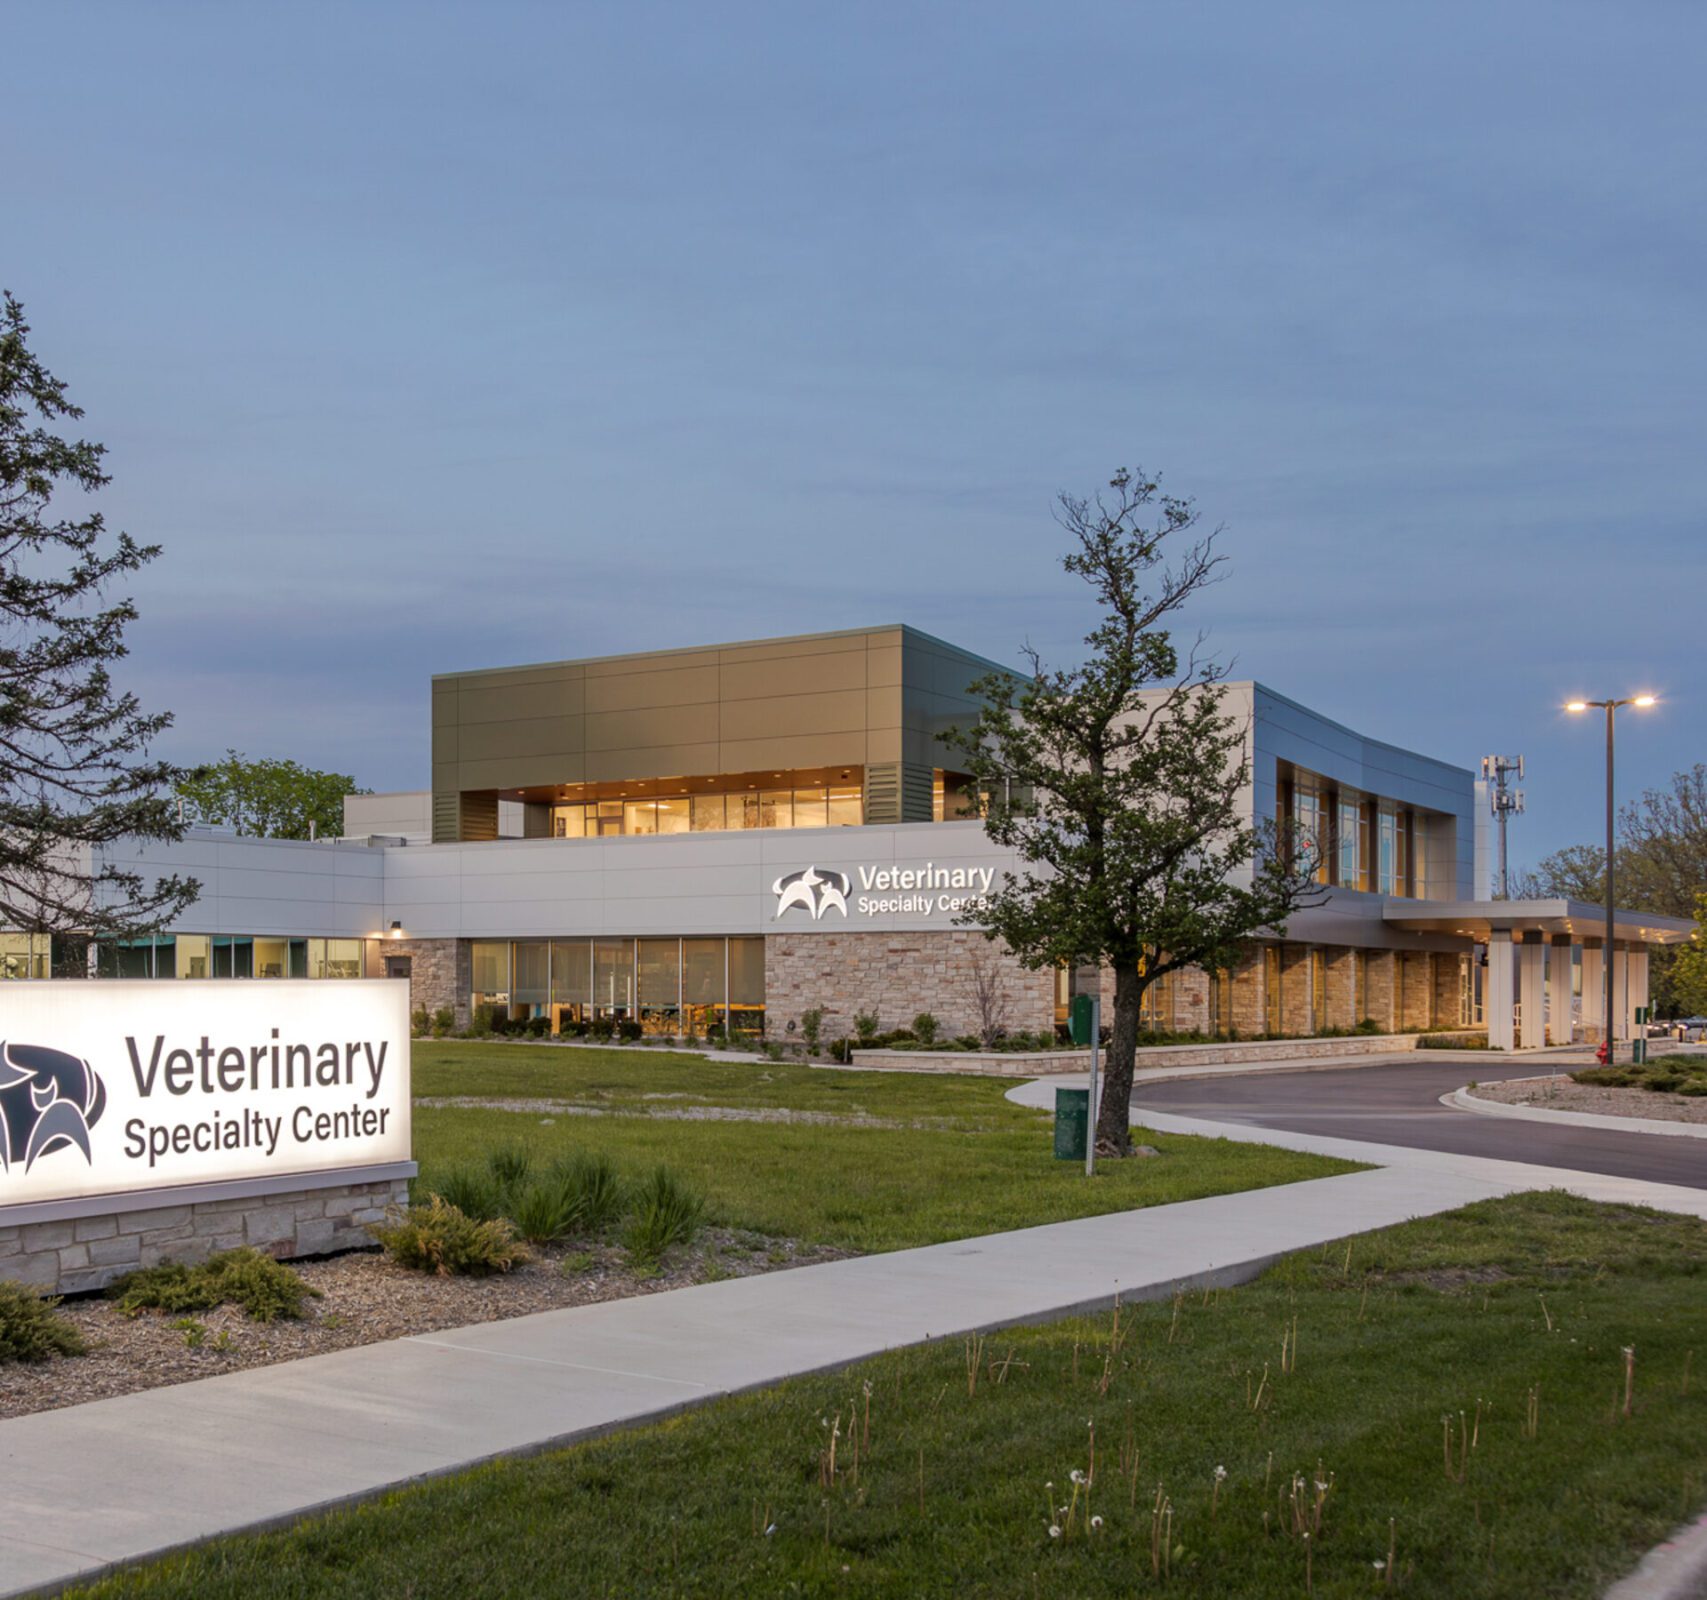 Veterinary Specialty Center exterior picture at twilight.